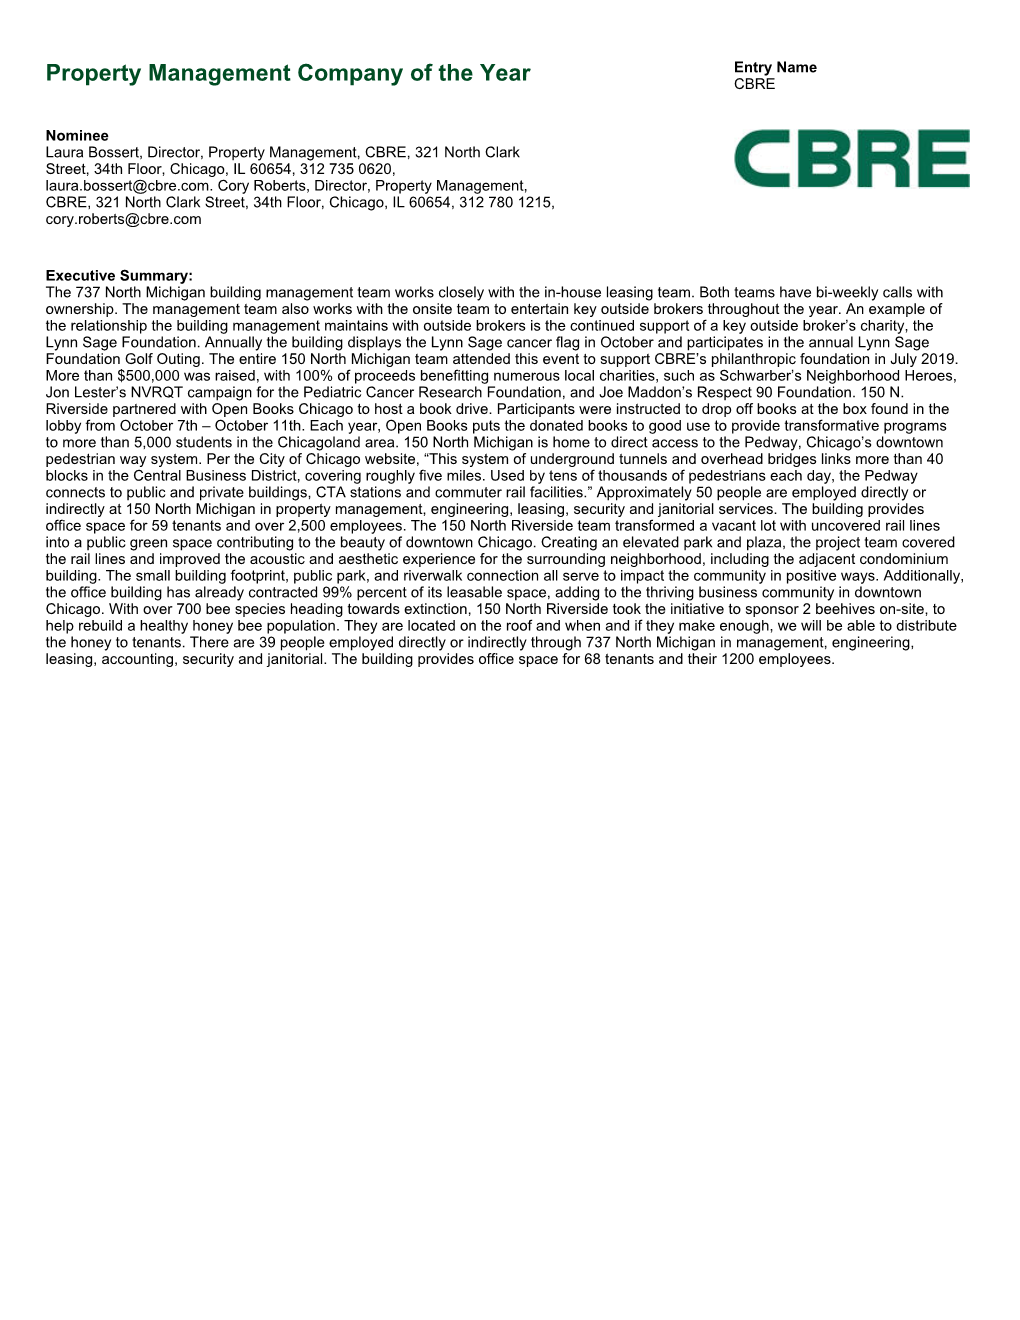 Property Management Company of the Year CBRE